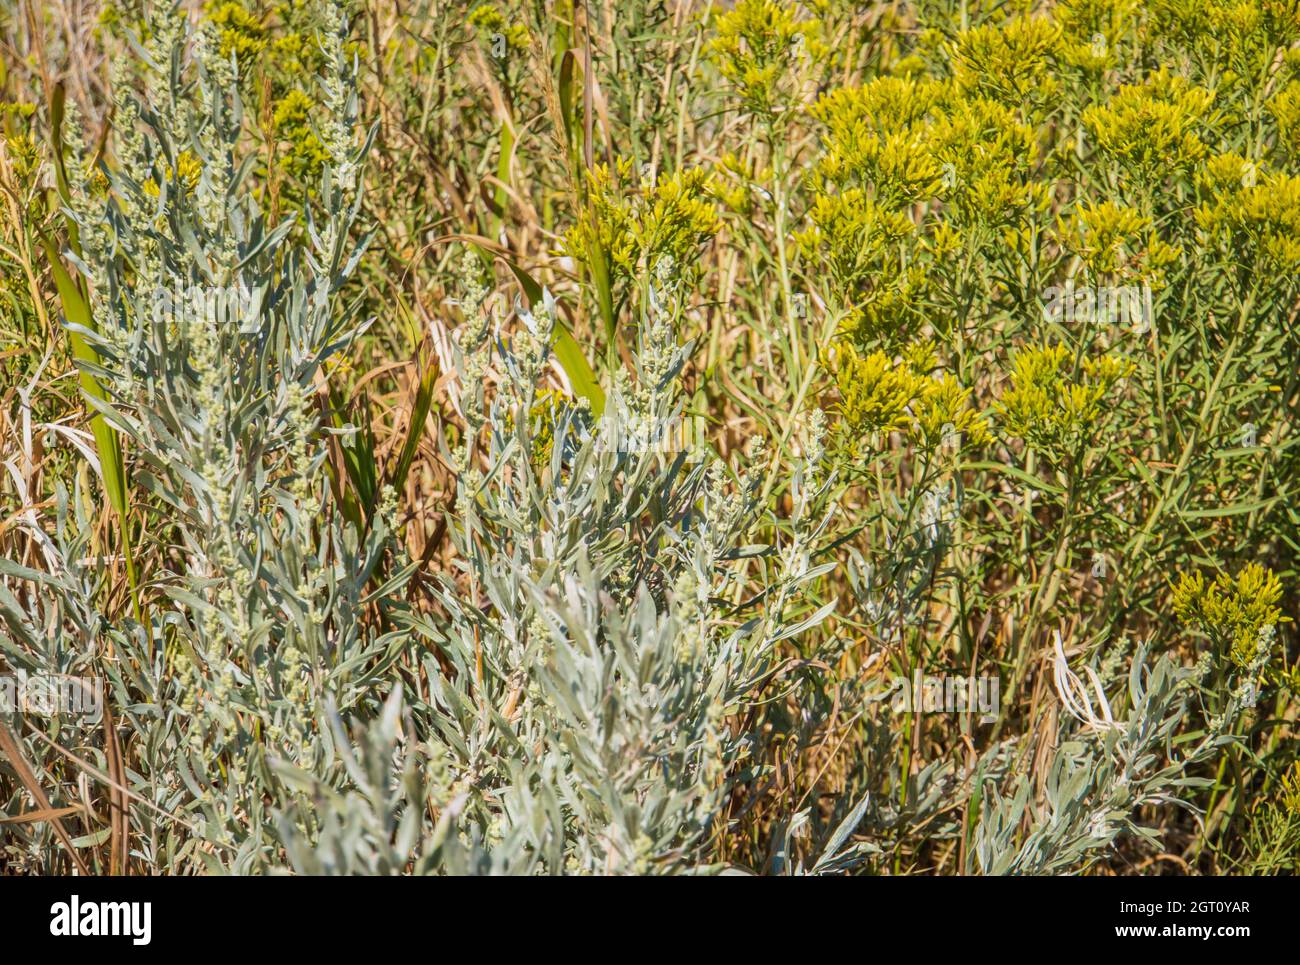 blue green sage and yellow rabbit bush flowers seen often on the Montana landscapes Stock Photo